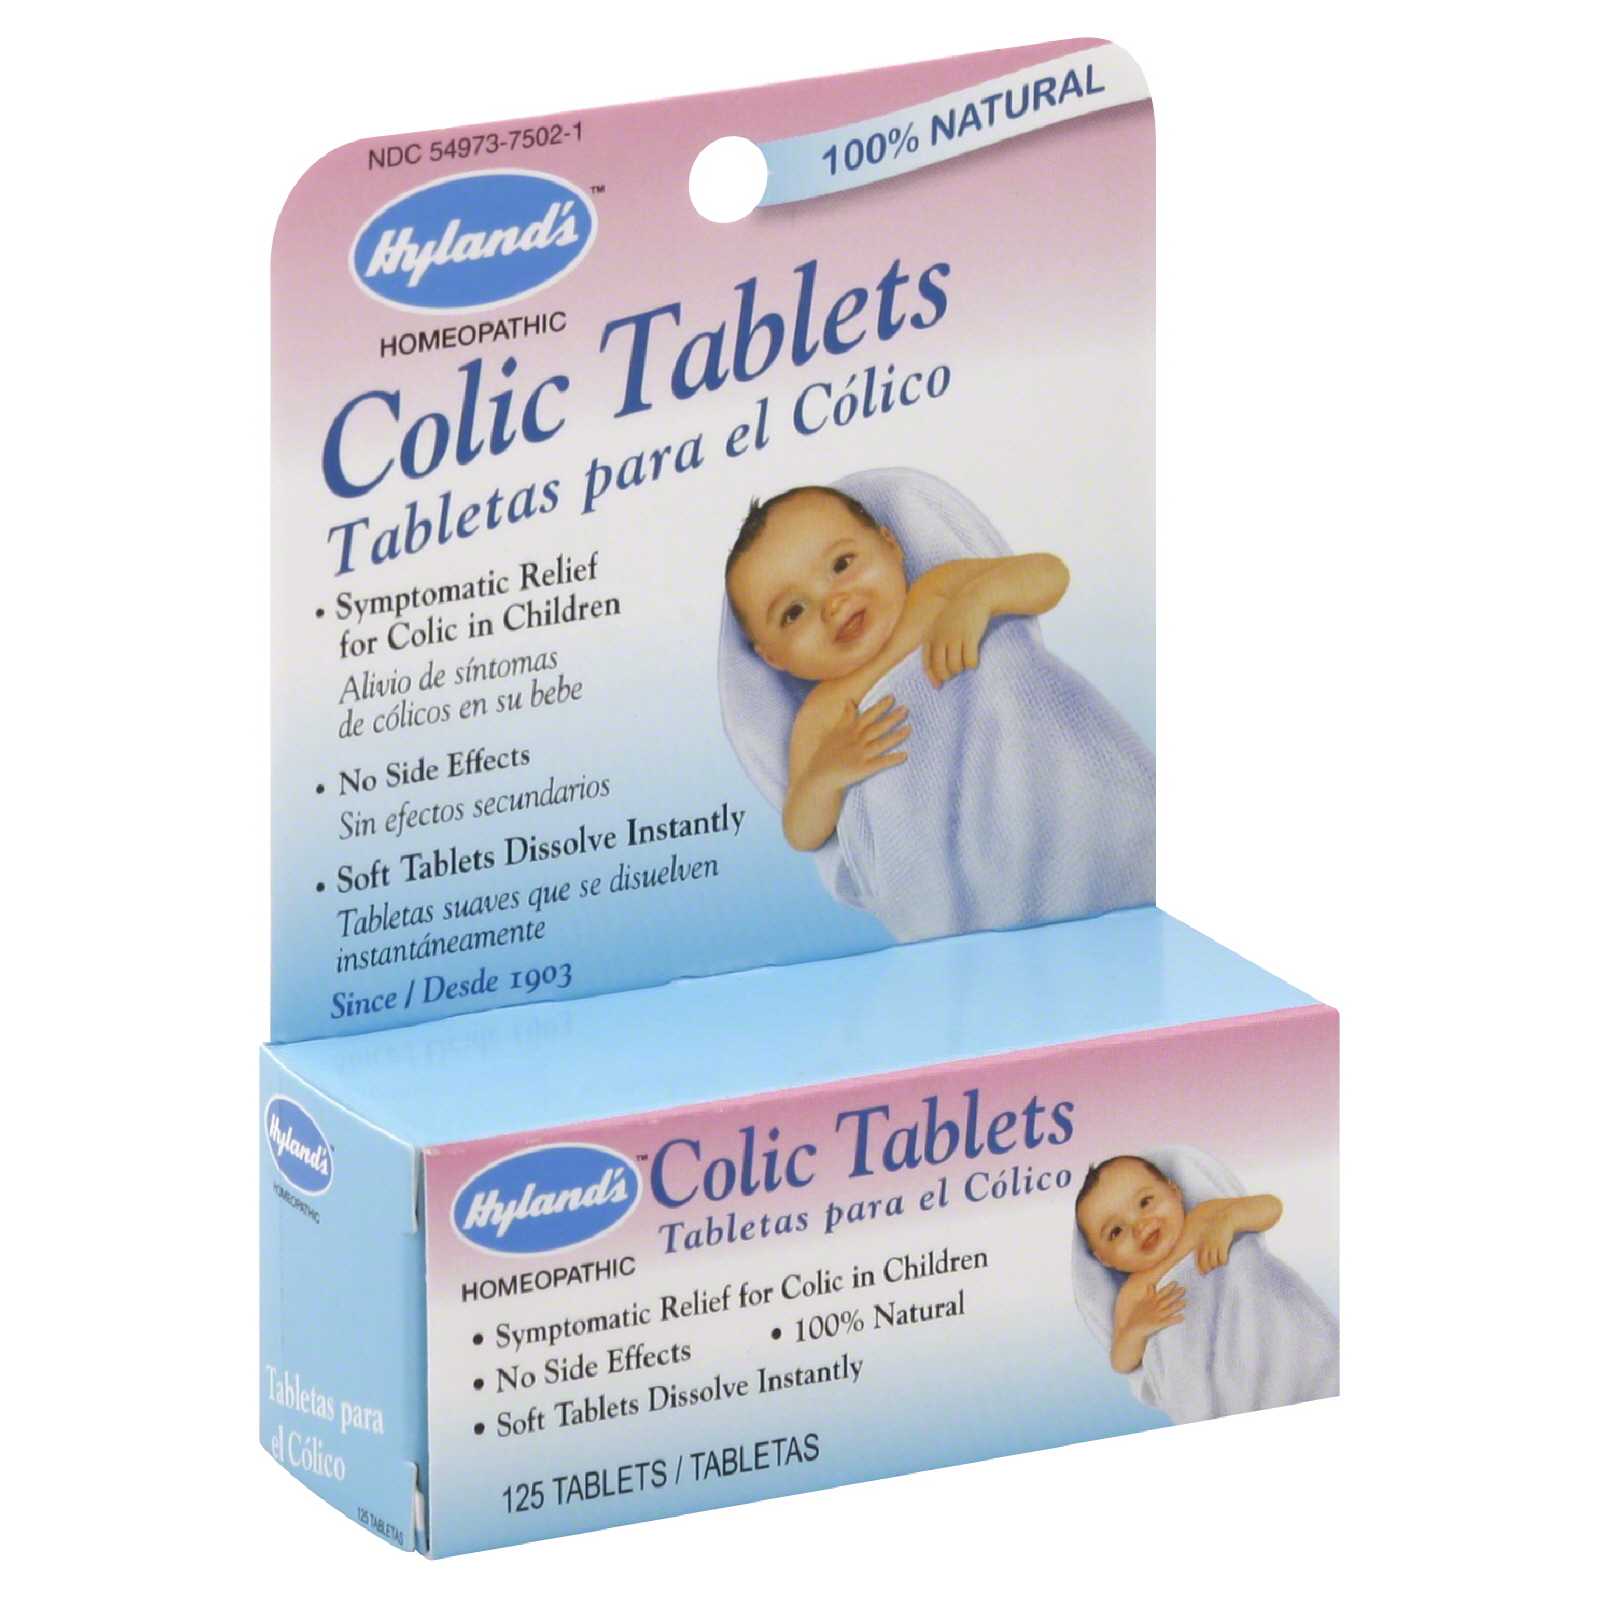 Colic Tablets, 125 tablets